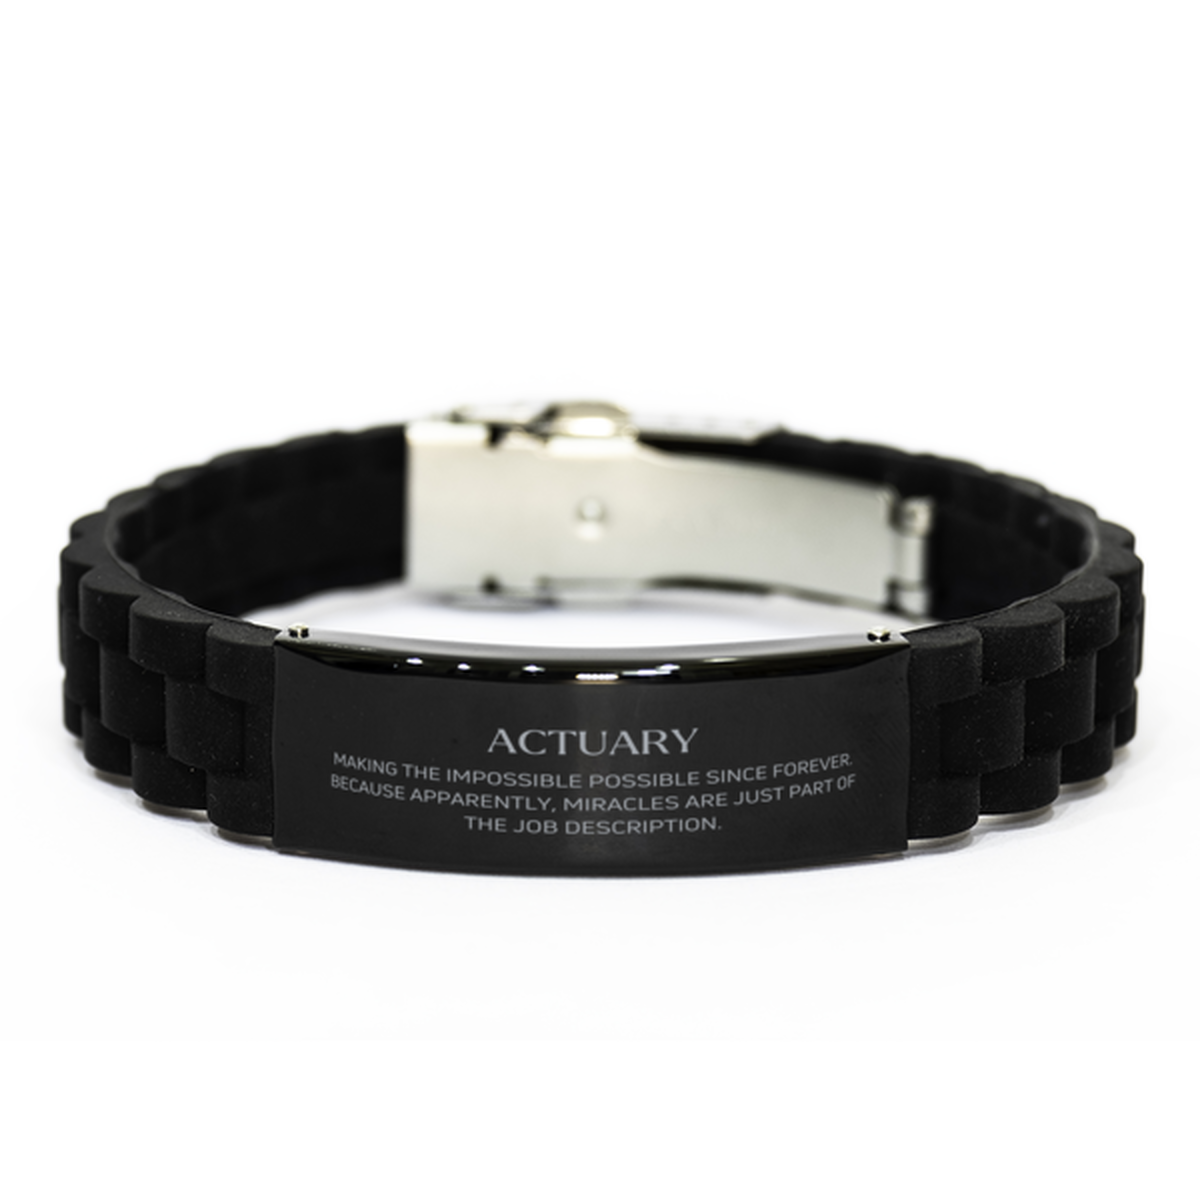 Funny Actuary Gifts, Miracles are just part of the job description, Inspirational Birthday Black Glidelock Clasp Bracelet For Actuary, Men, Women, Coworkers, Friends, Boss